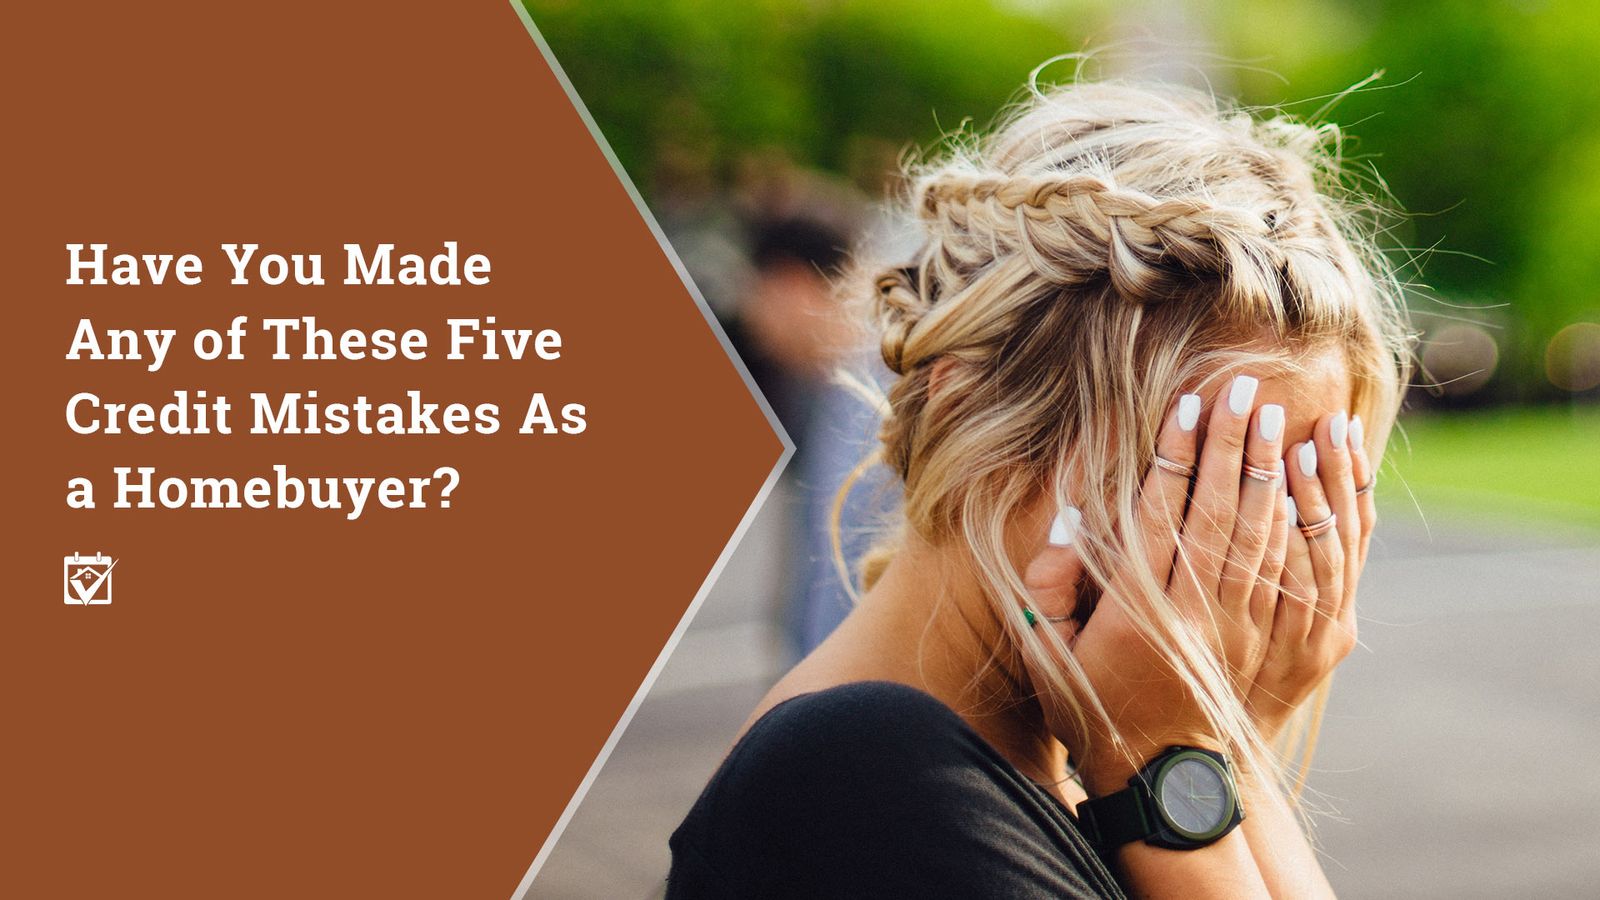 Have You Made Any of These Five Credit Mistakes As a Homebuyer?